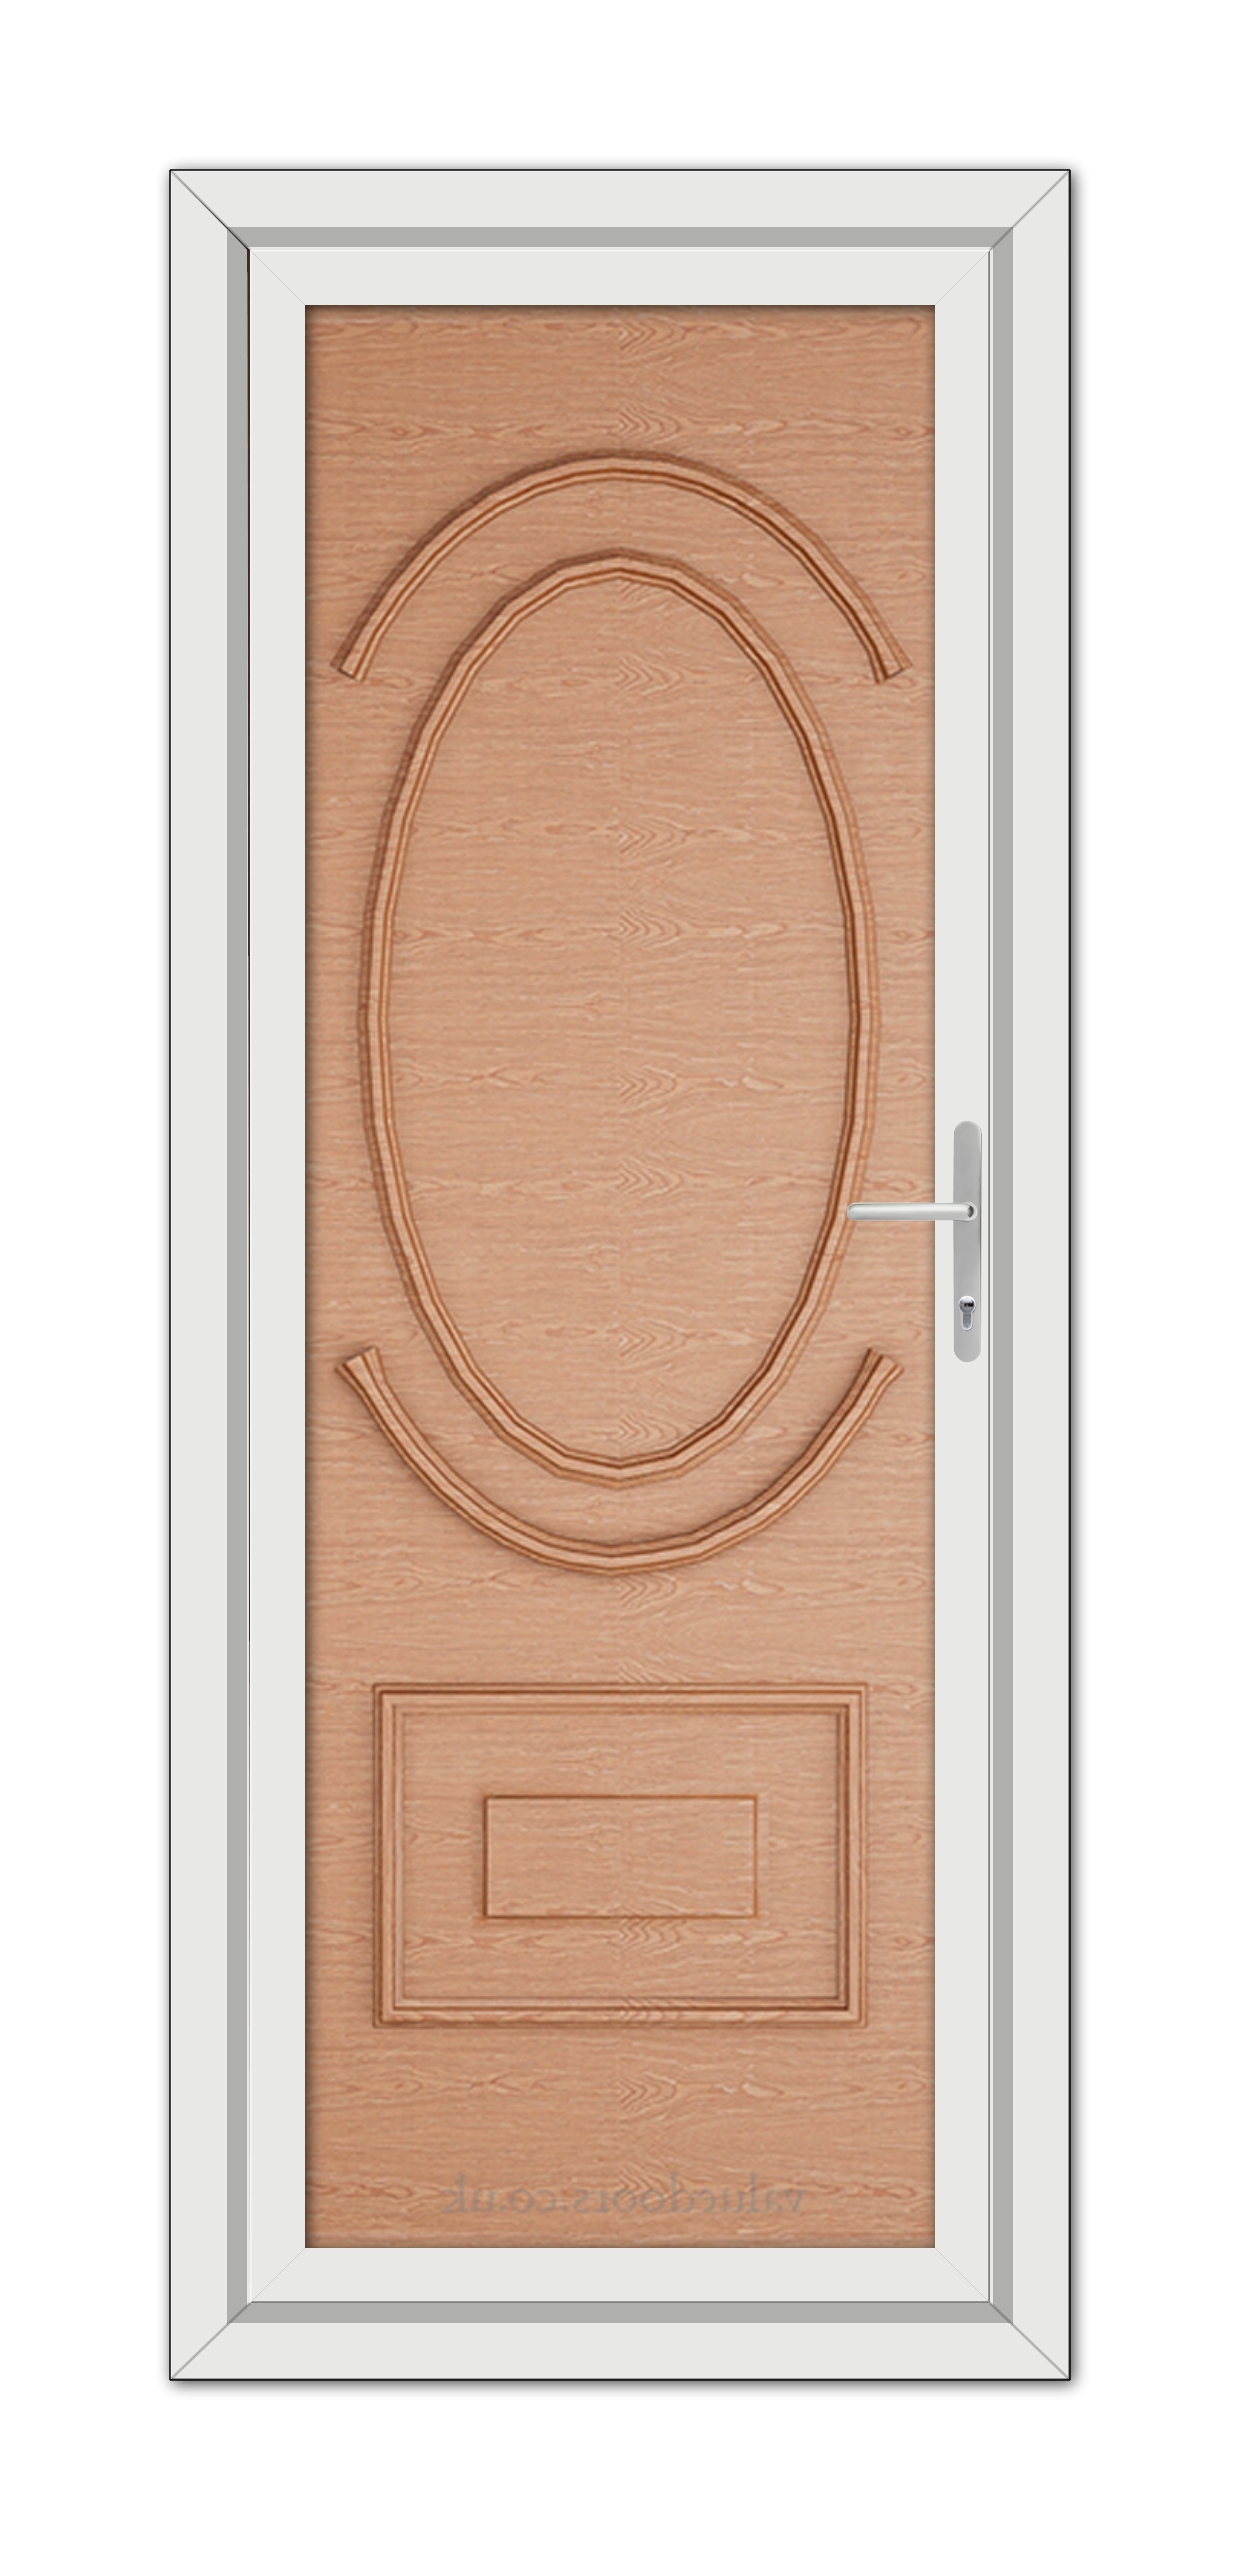 A white Irish Oak Richmond Solid uPVC door with a carved wooden design.